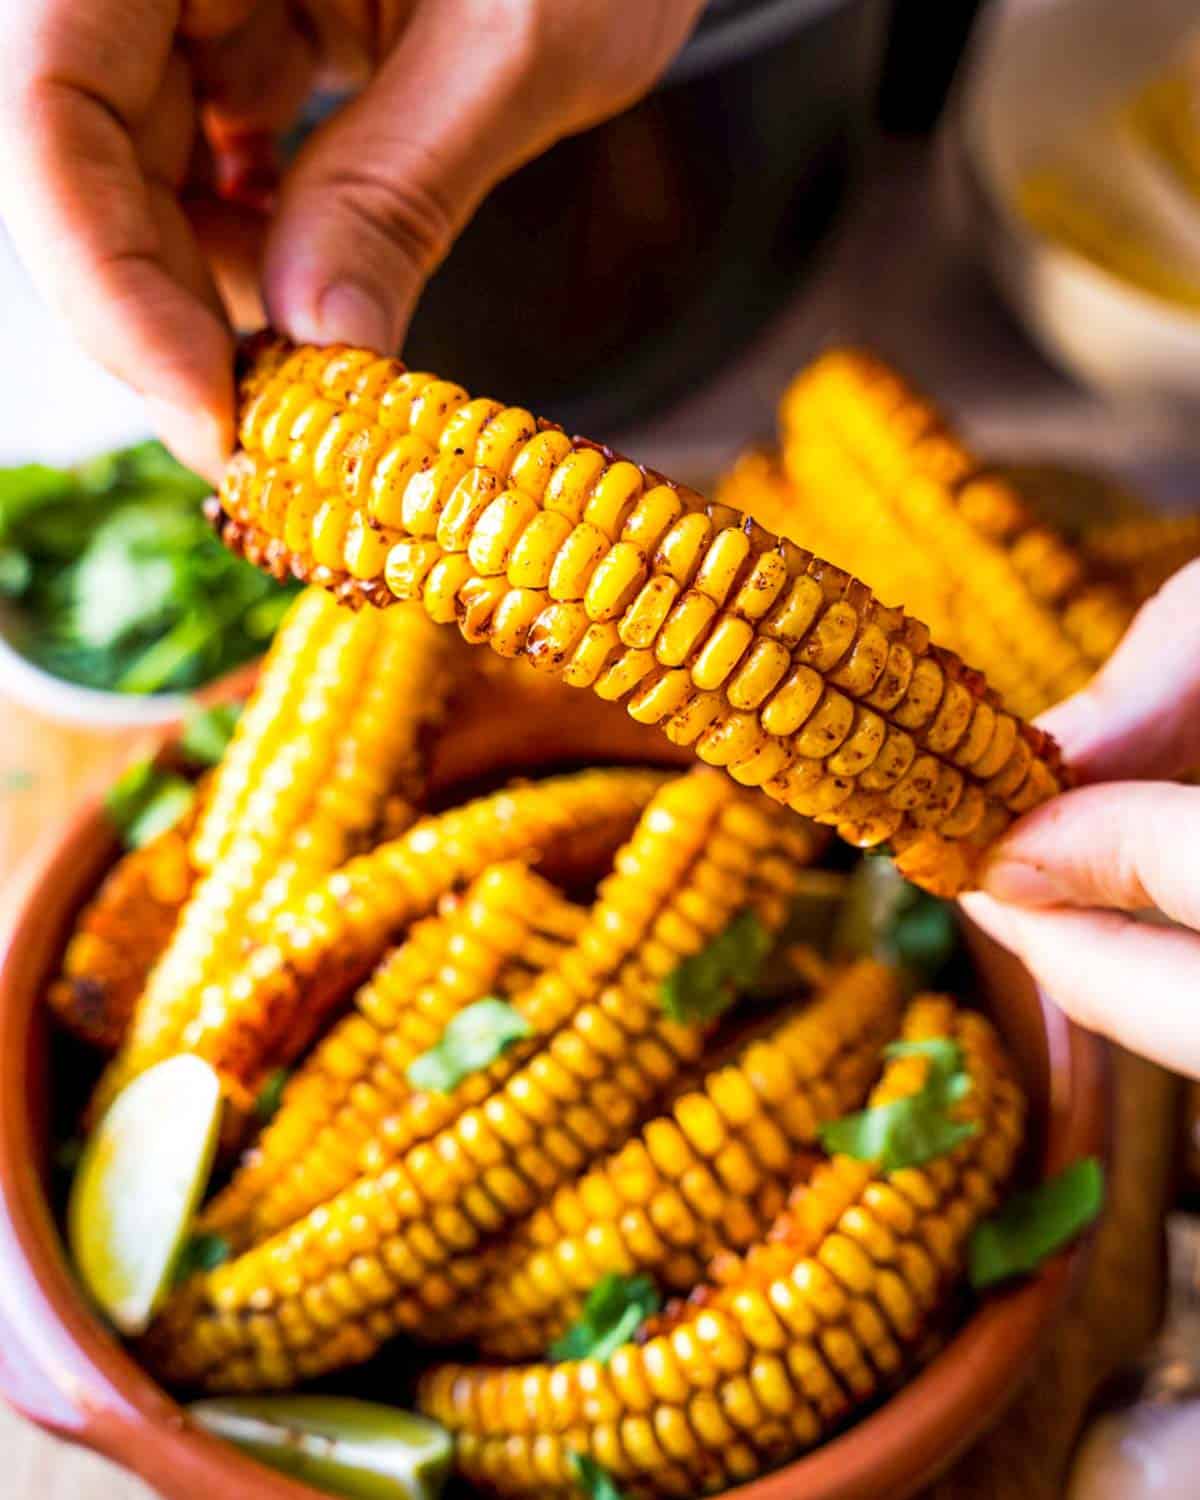 Hand holding a corn riblett with a bowl full of corn ribs in the background.